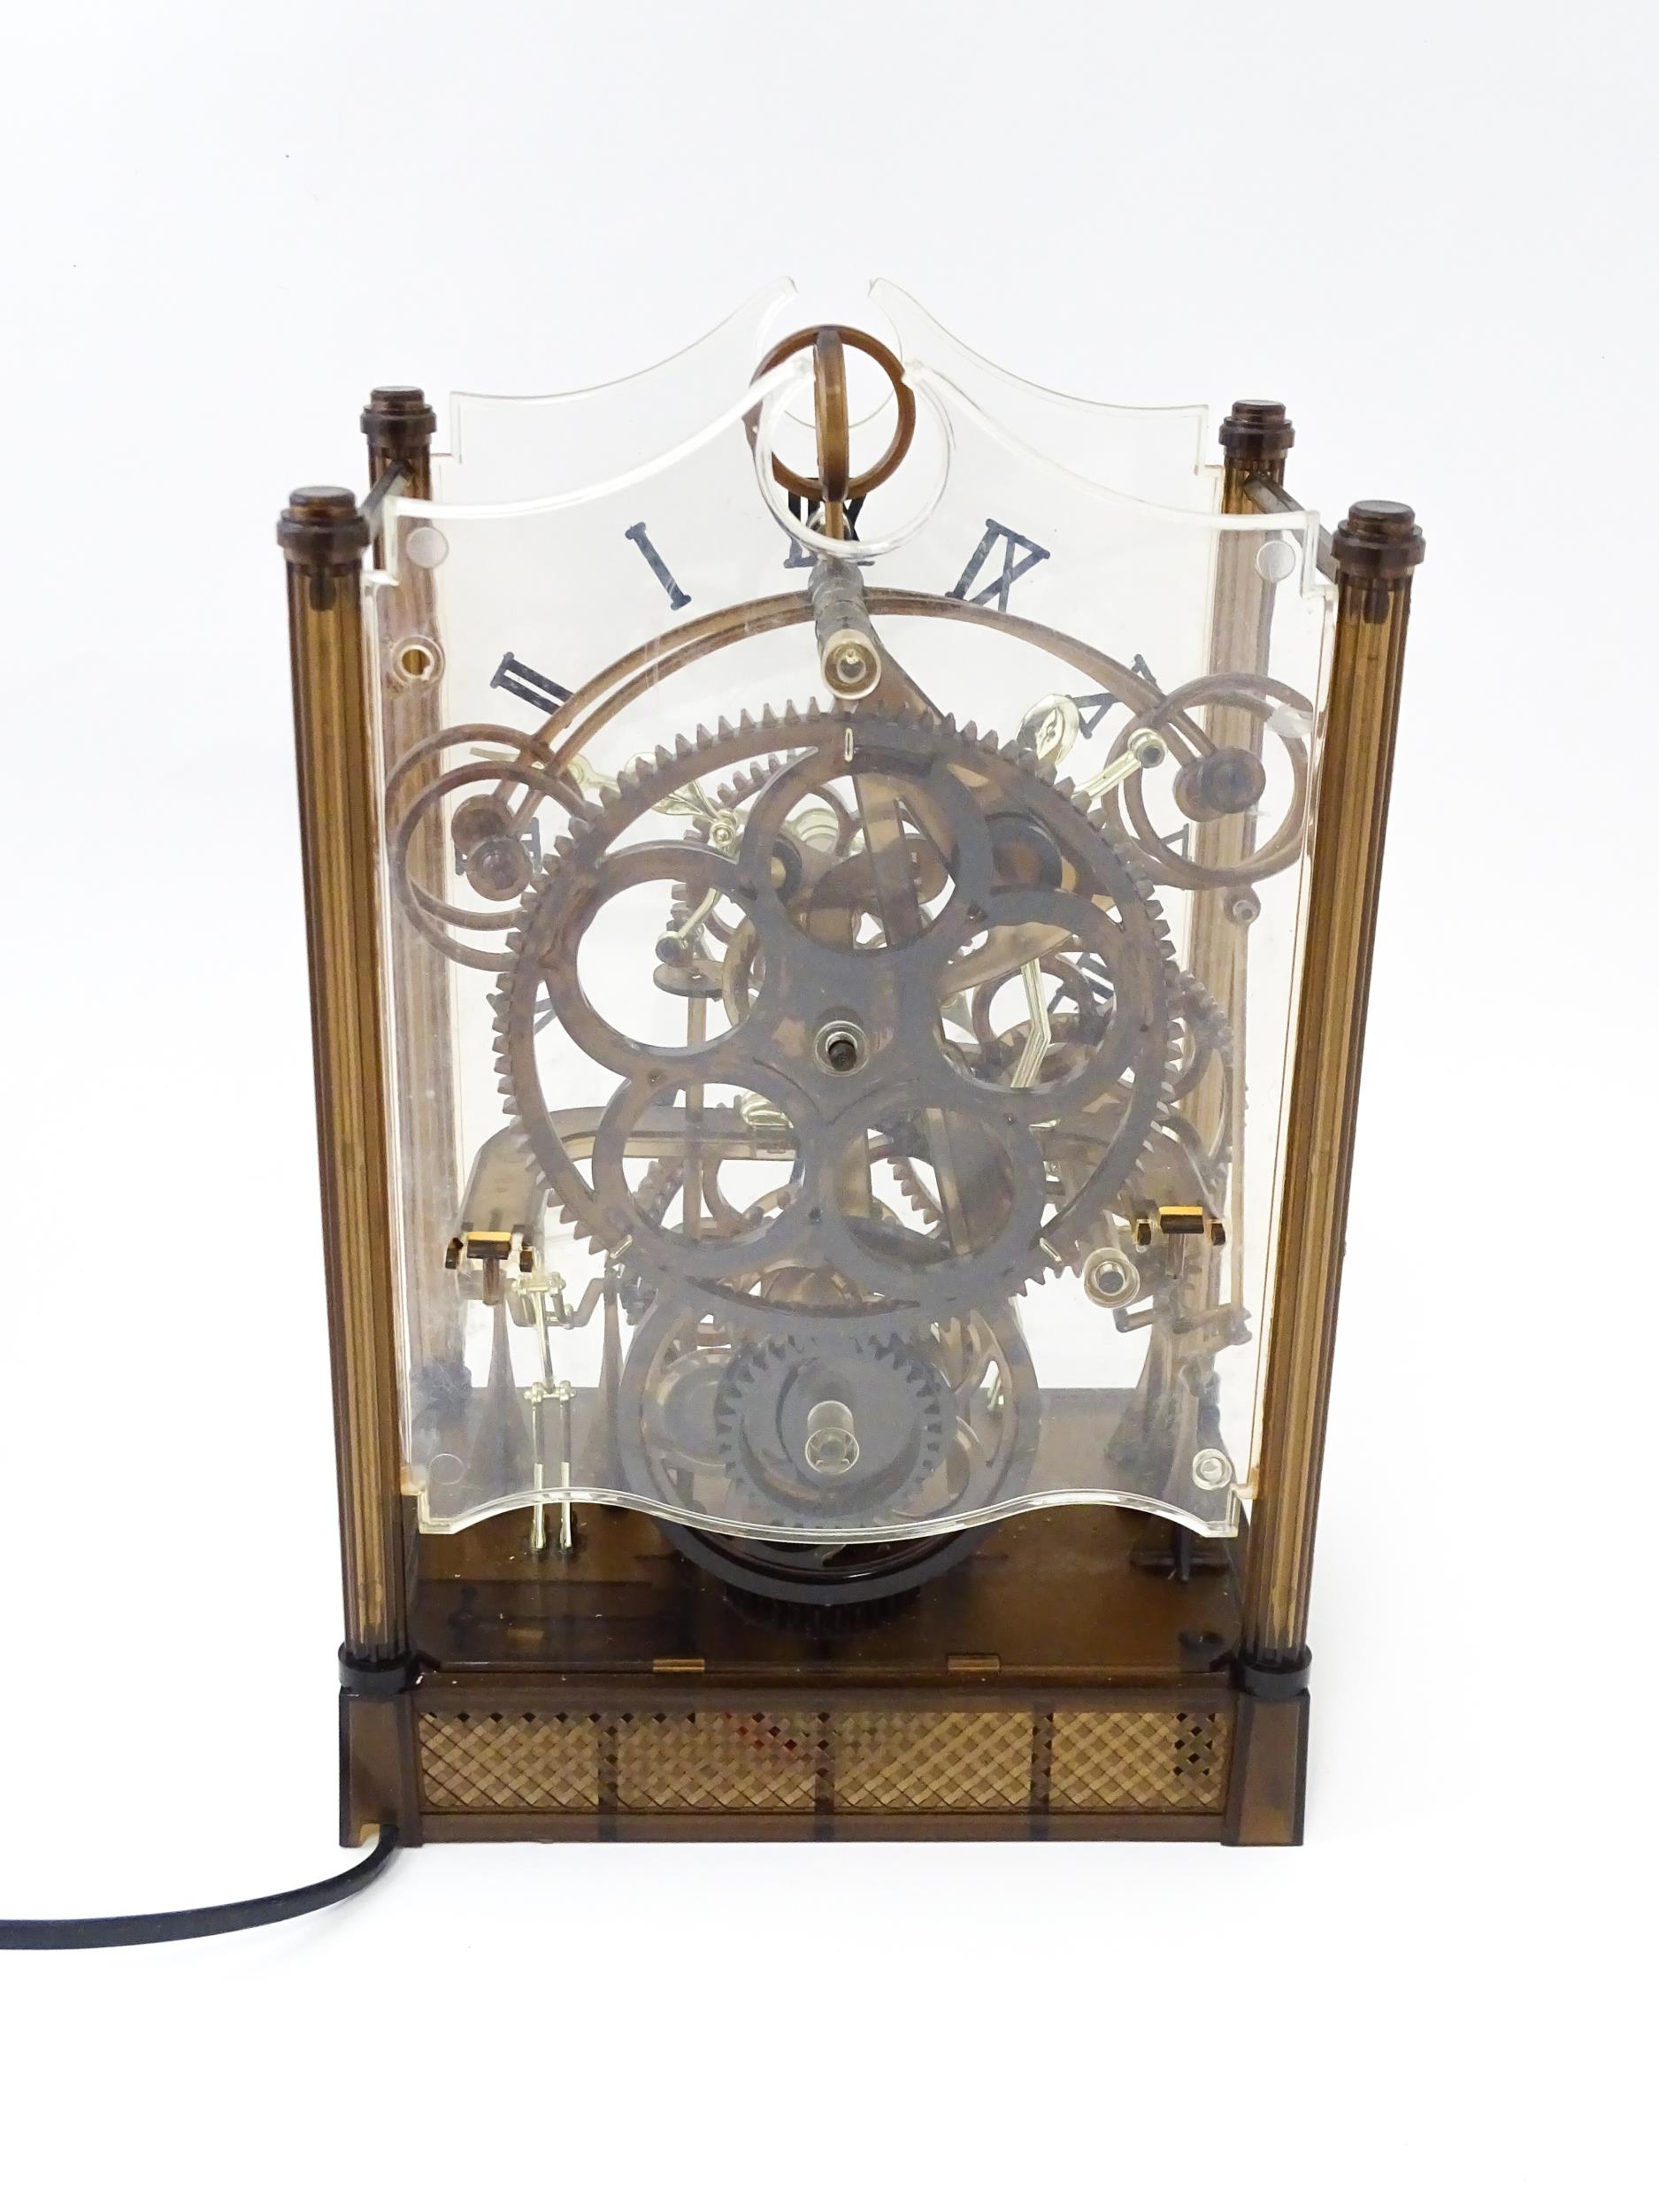 An Arrow Industries ' Electric Master Motion Clock' known as the Animated Time Machine' of plastic - Image 9 of 12